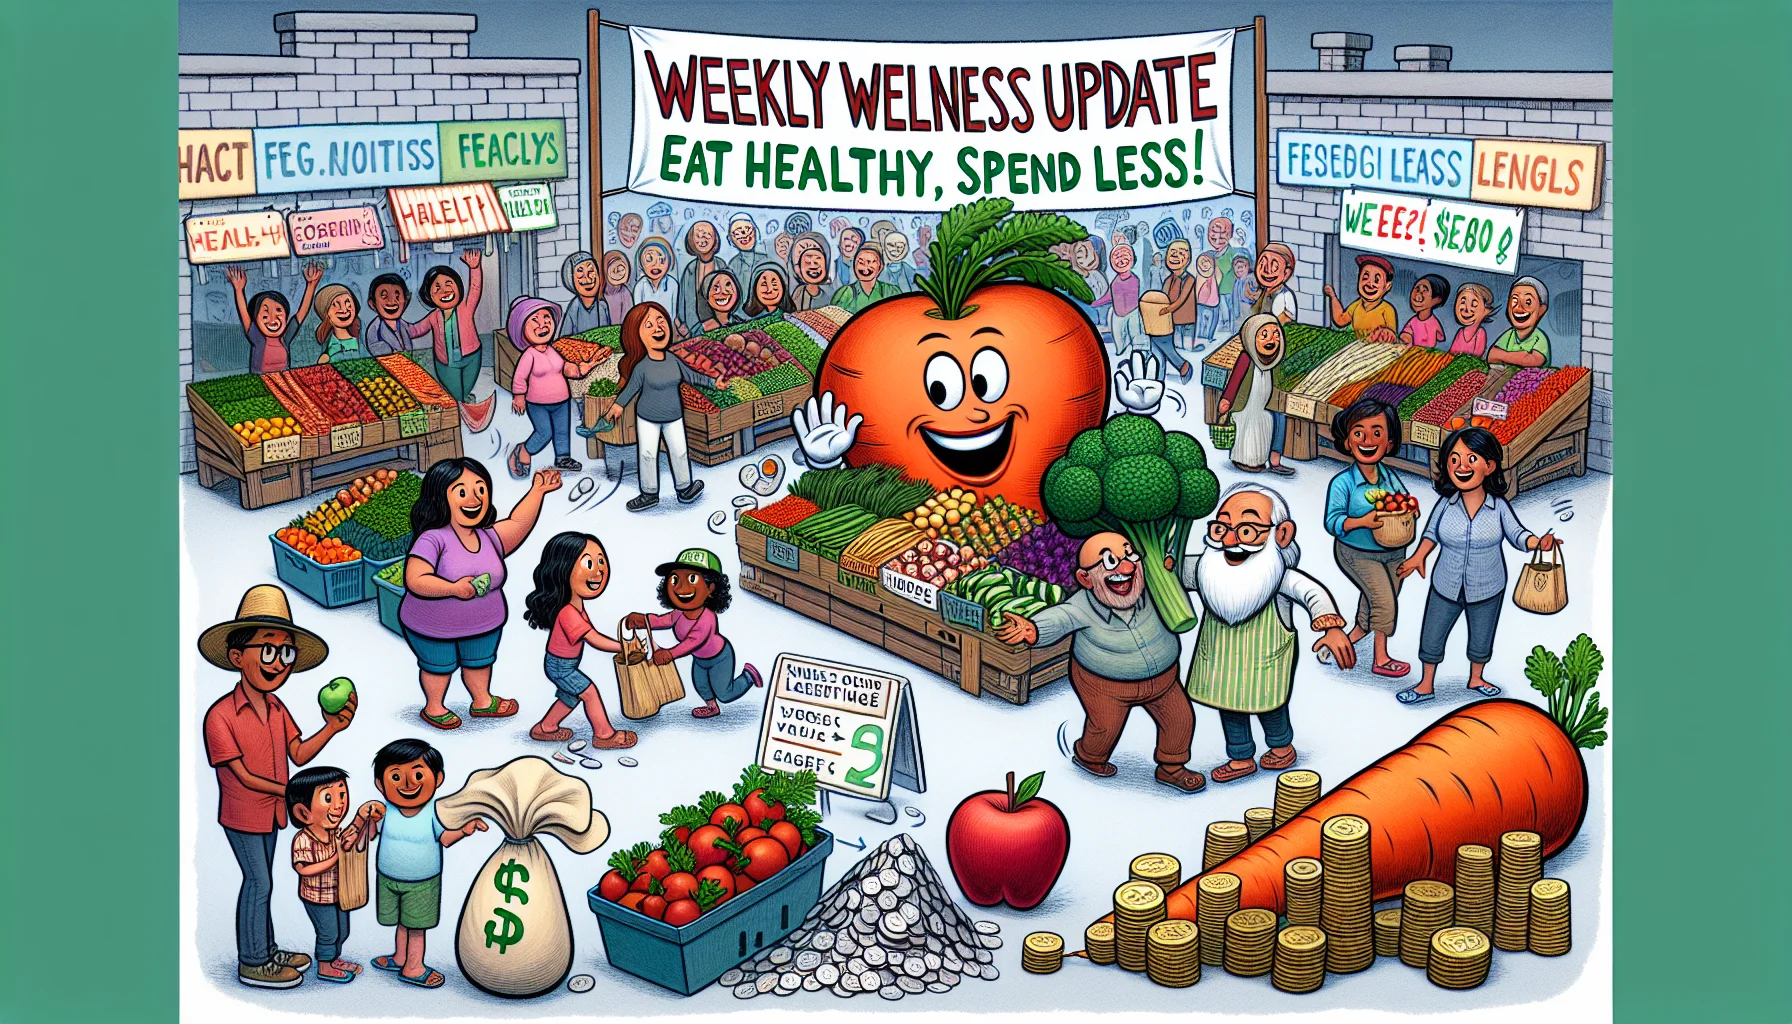 Imagine a whimsical and humorous scene for a 'Weekly Wellness Update'. Picture a lively farmers market bustling with people of various genders and descents, such as Hispanic, Caucasian, Middle-Eastern and South Asian. Everyone is enthusiastically buying affordable, fresh, and colorful fruits and vegetables. A large sign proclaims 'Eating Healthy for Less!'. A carrot and apple are depicted with friendly, animated faces, enticing people to healthy eating. Piles of coins are humorously juxtaposed with enormous fruits and vegetables indicating affordability. A light-hearted textual overlay says, 'Weekly Wellness Update: Eat Healthy, Spend Less!'.